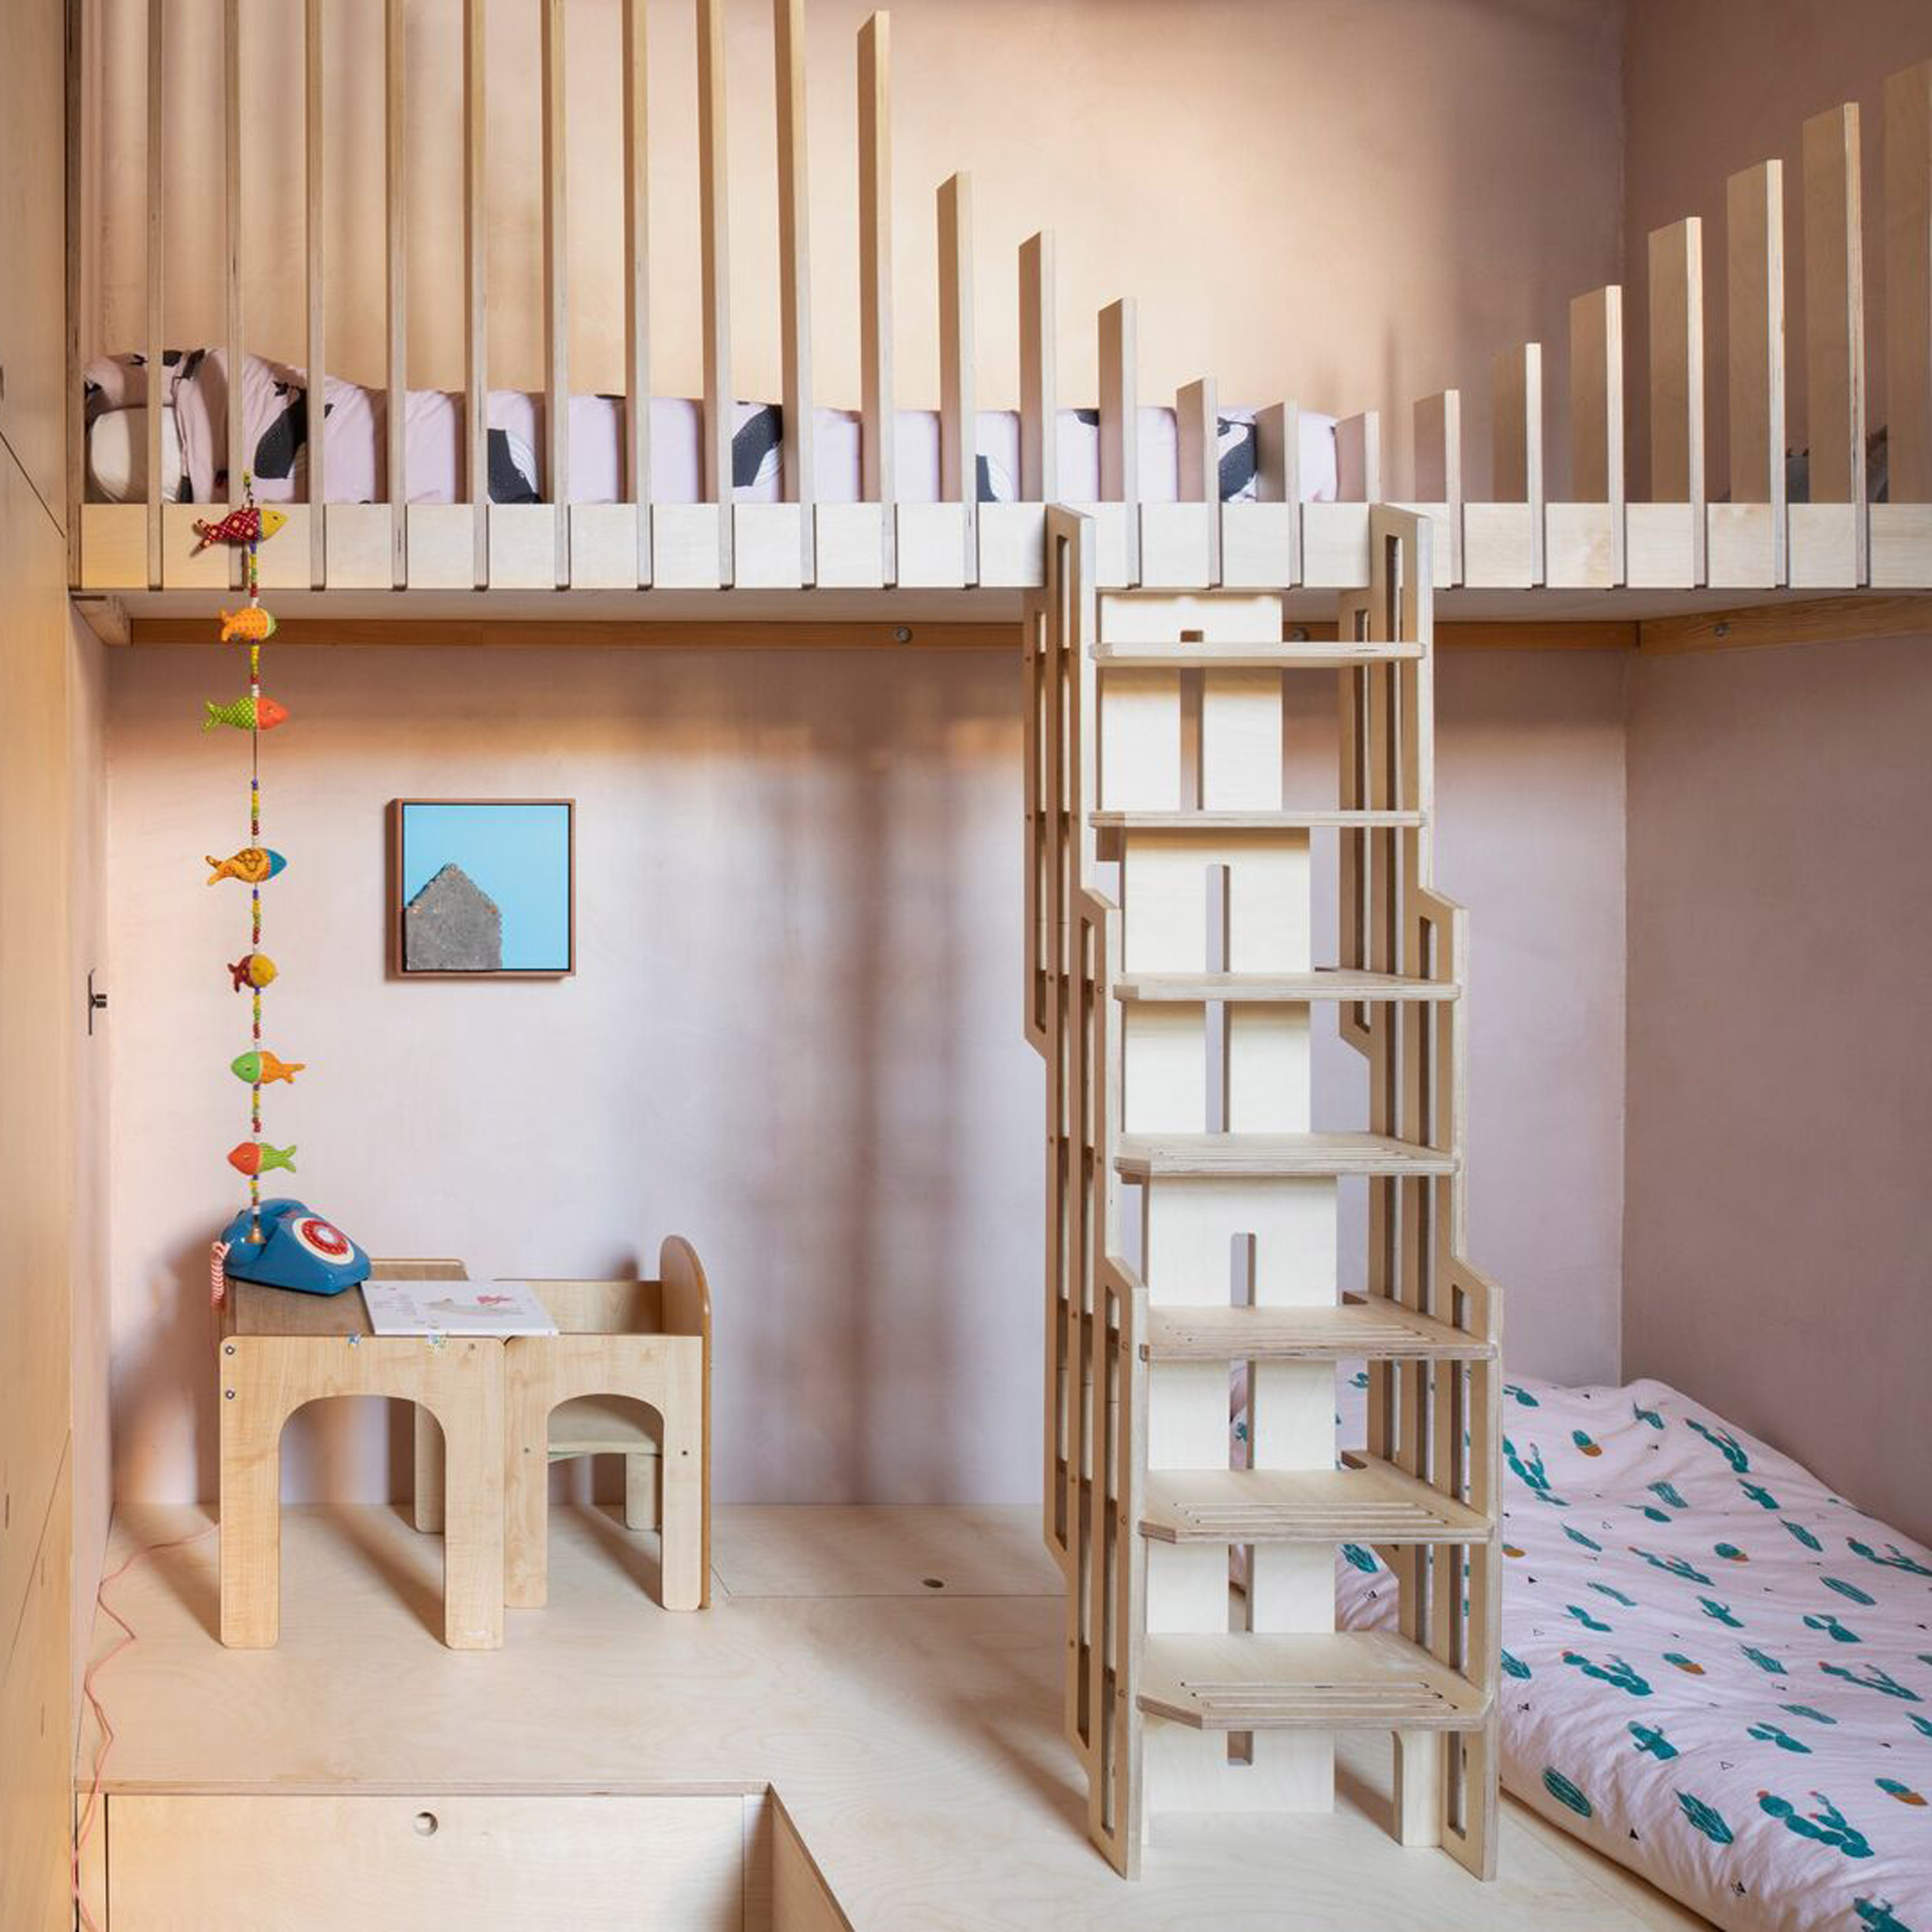 Ten kids' rooms with space saving loft beds and bunk beds